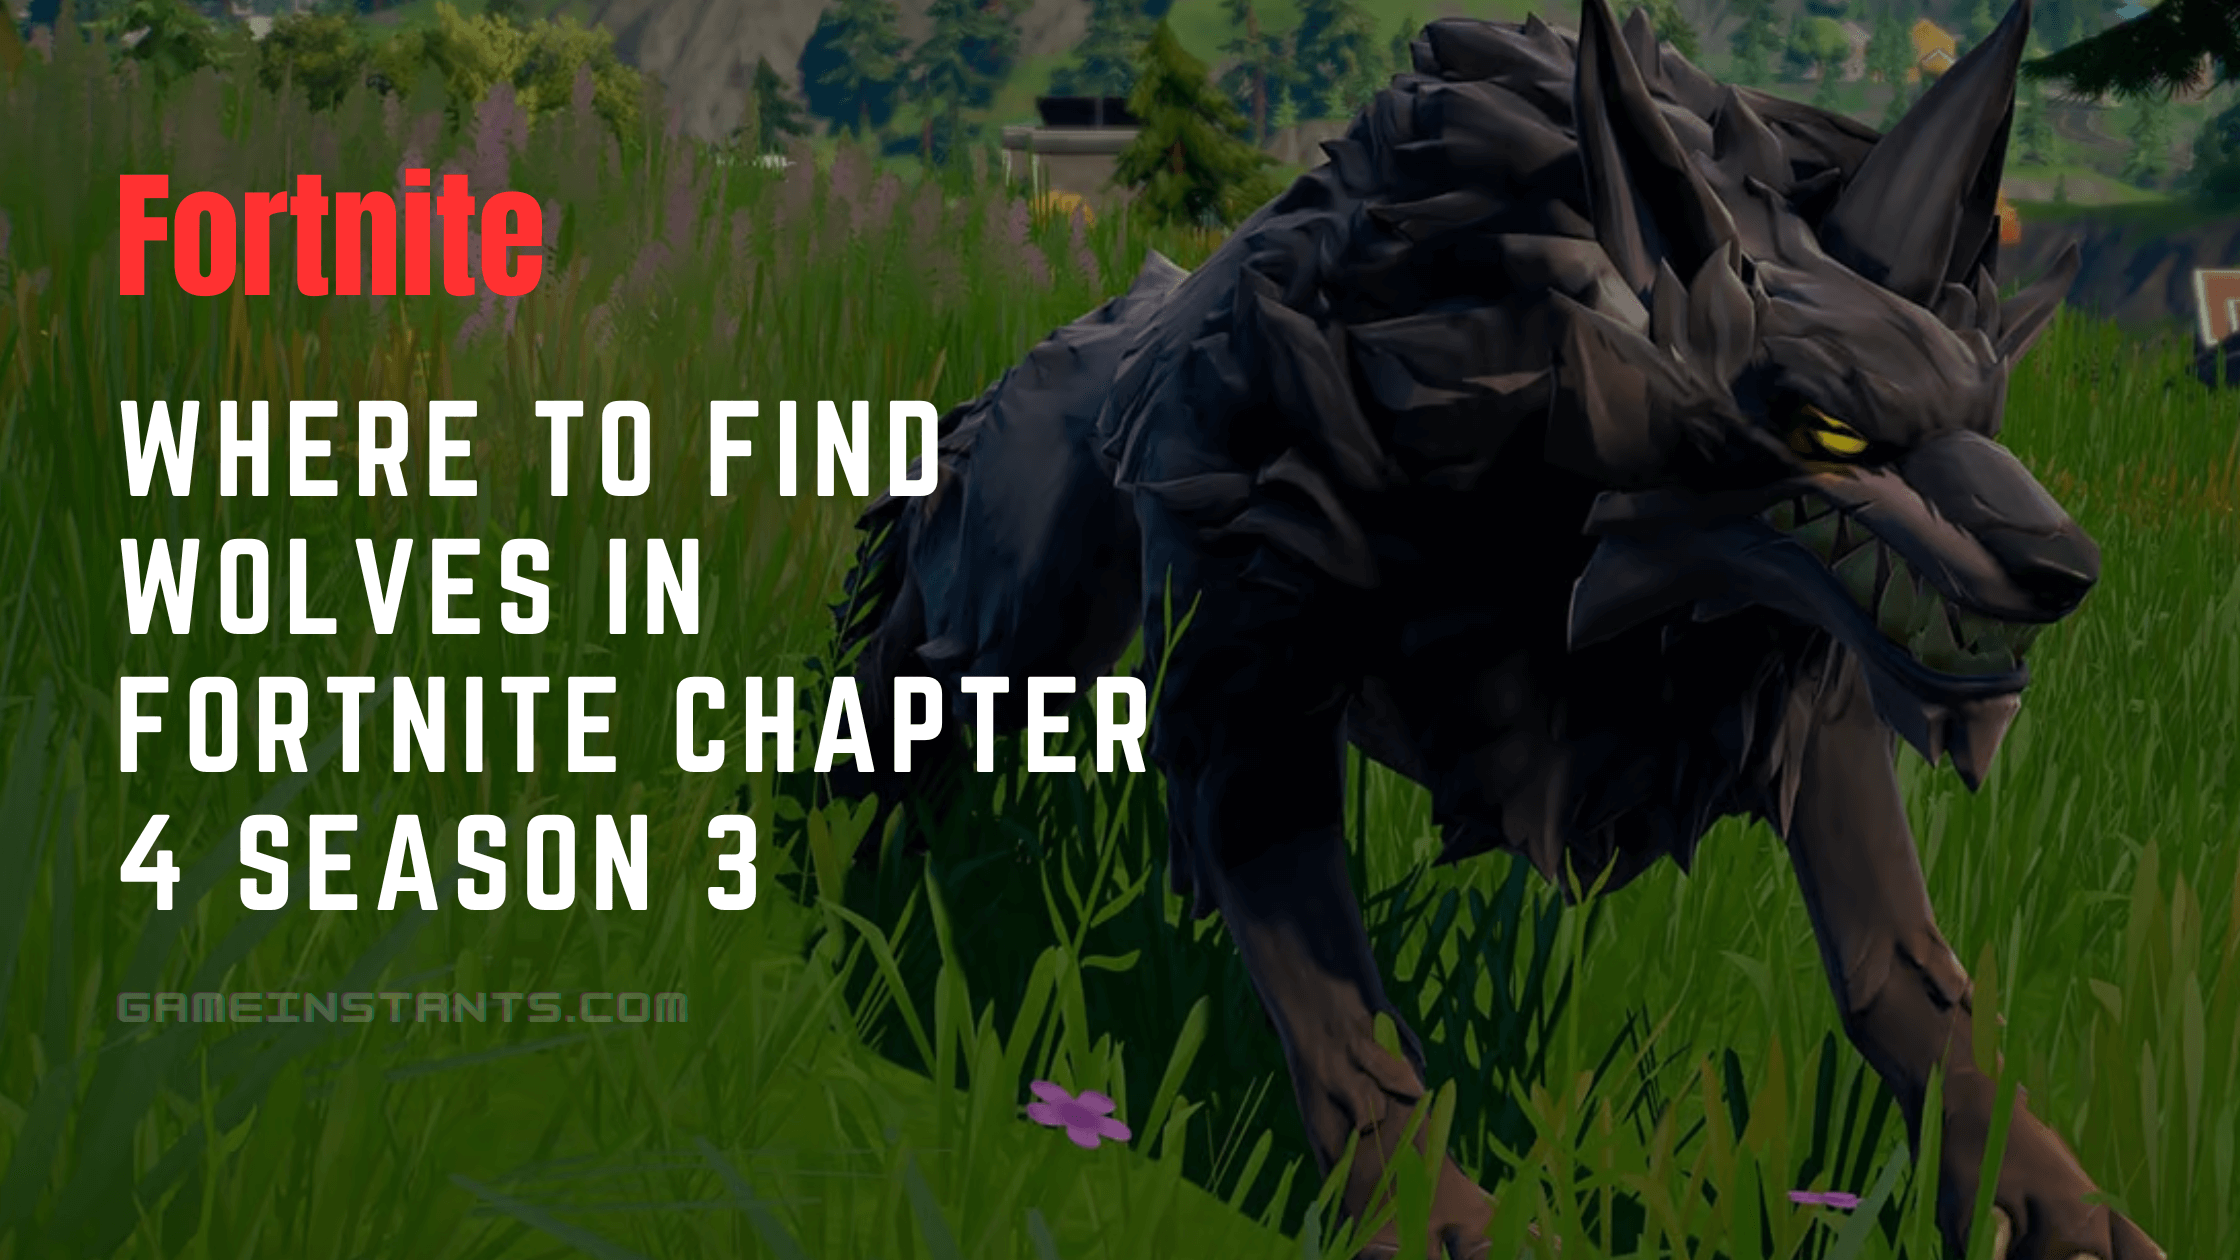 where to find wolves in fortnite chapter 4 season 3